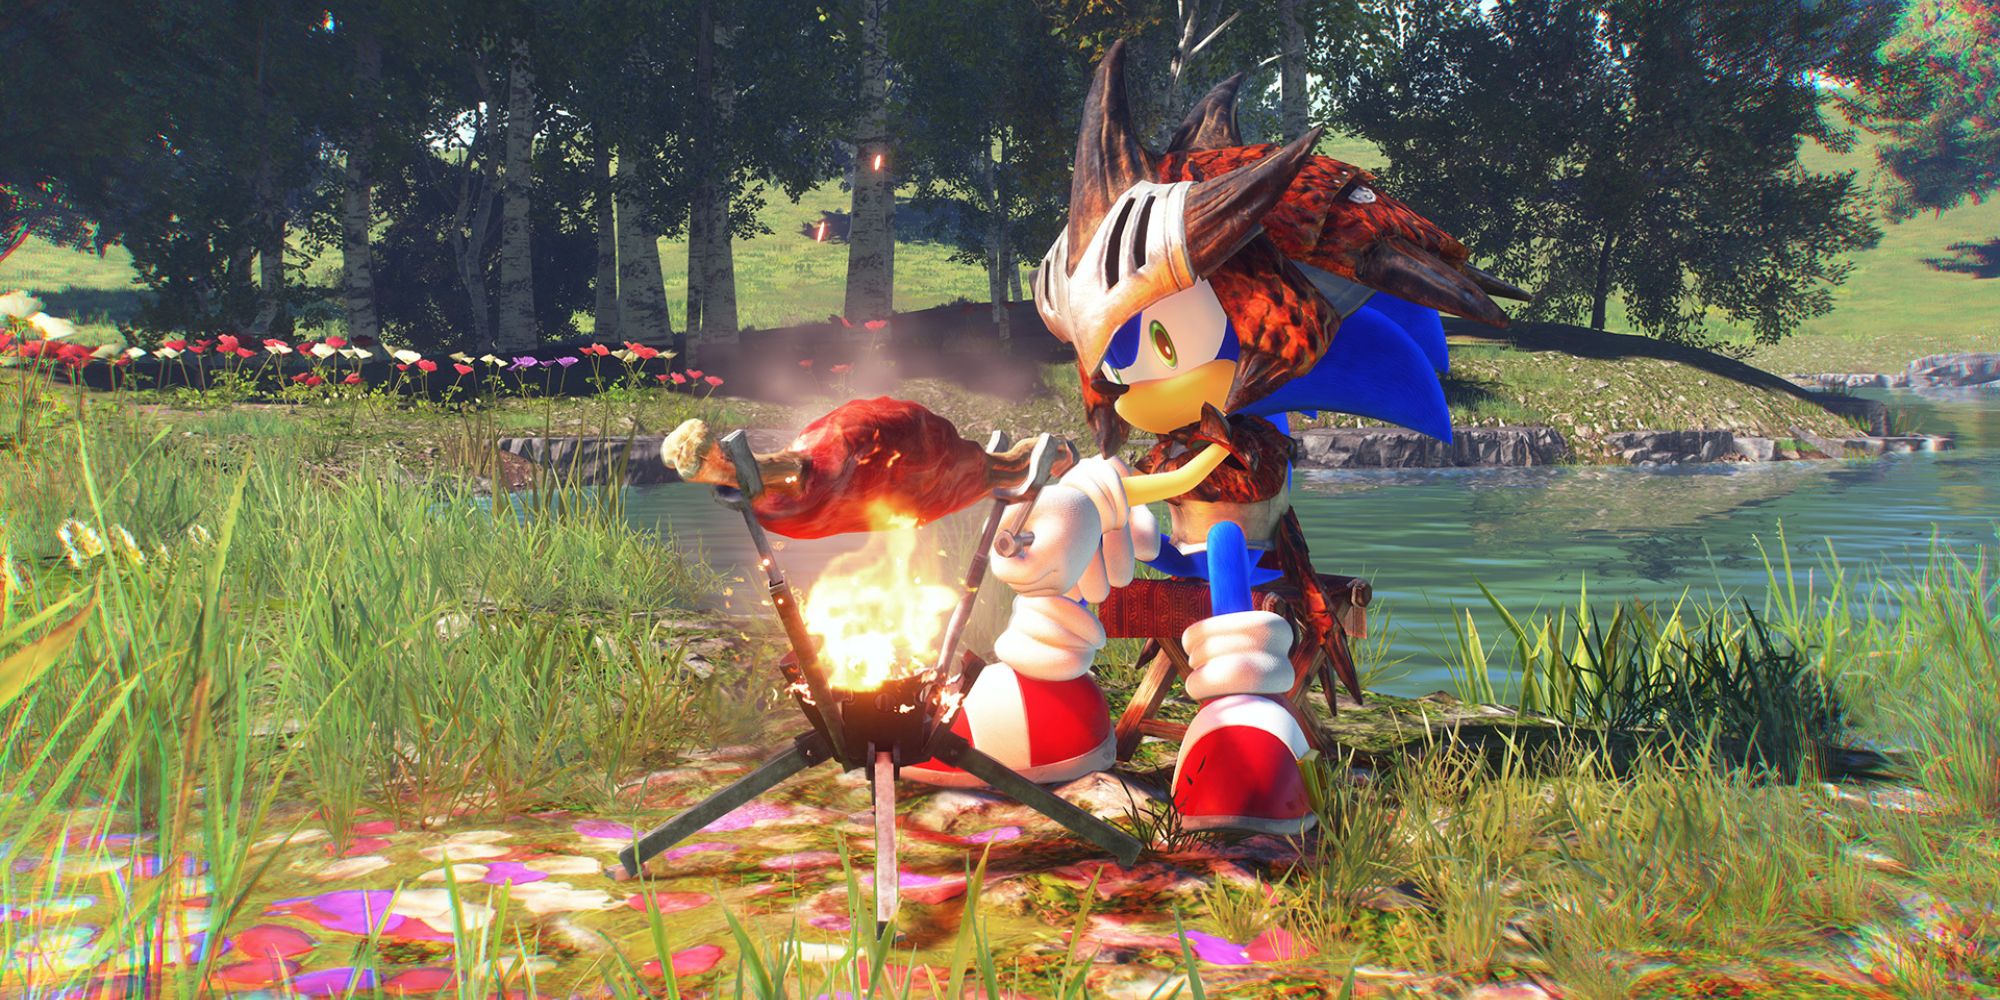 Sonic cooking a leg of meat on a campfire